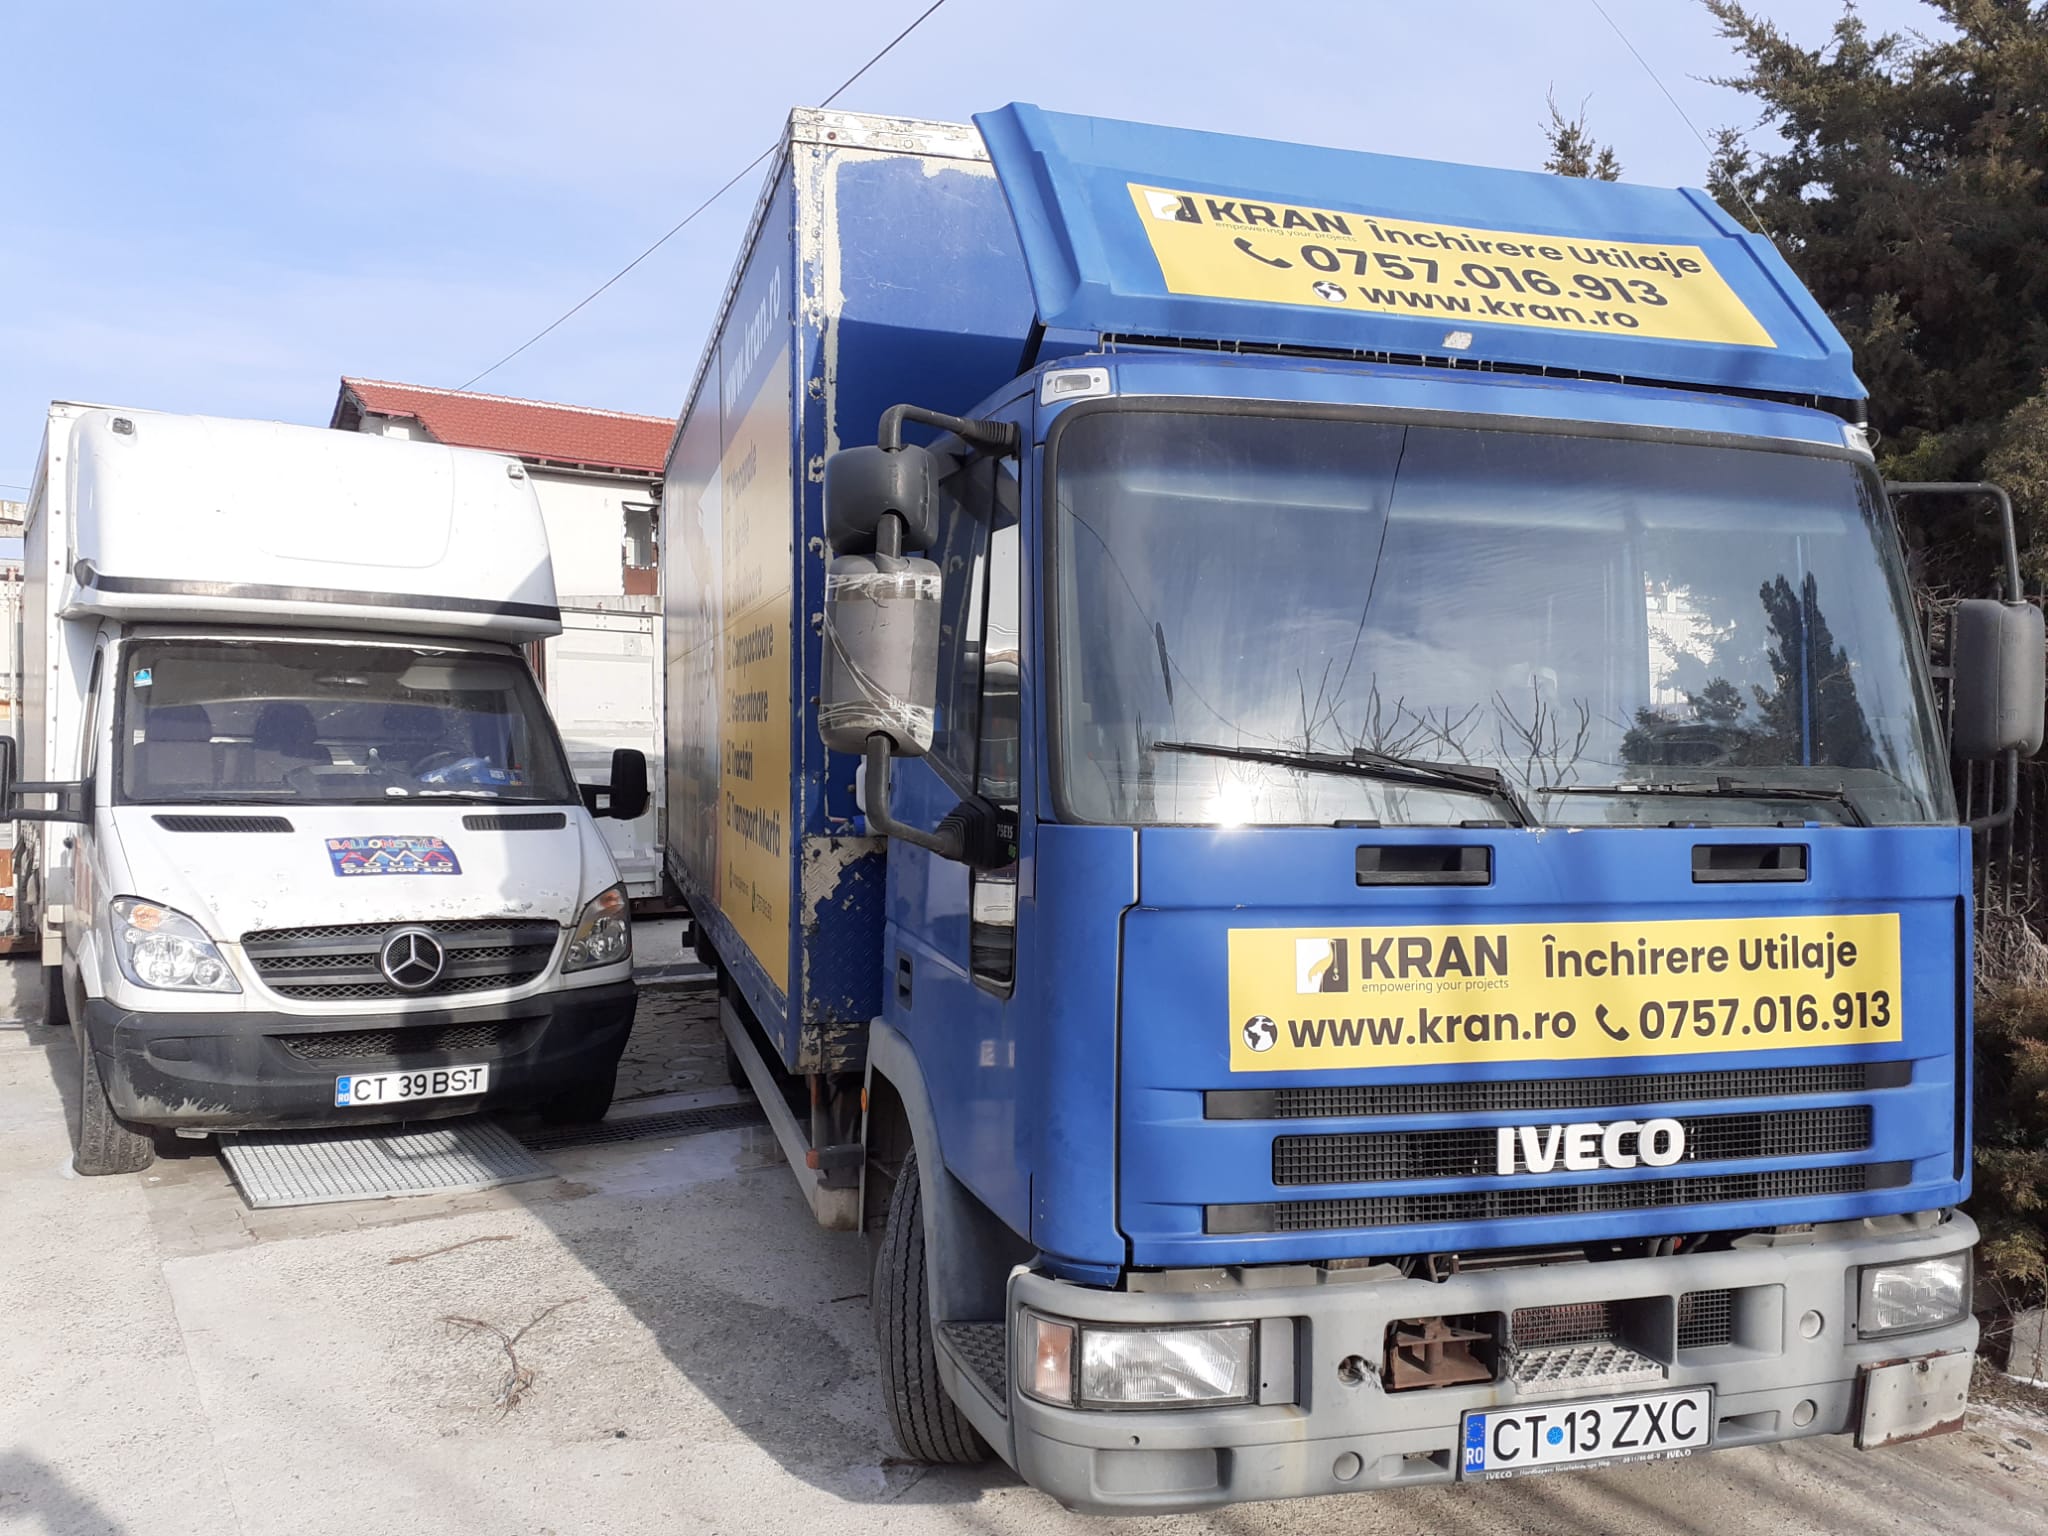 Truck rental for freight transport